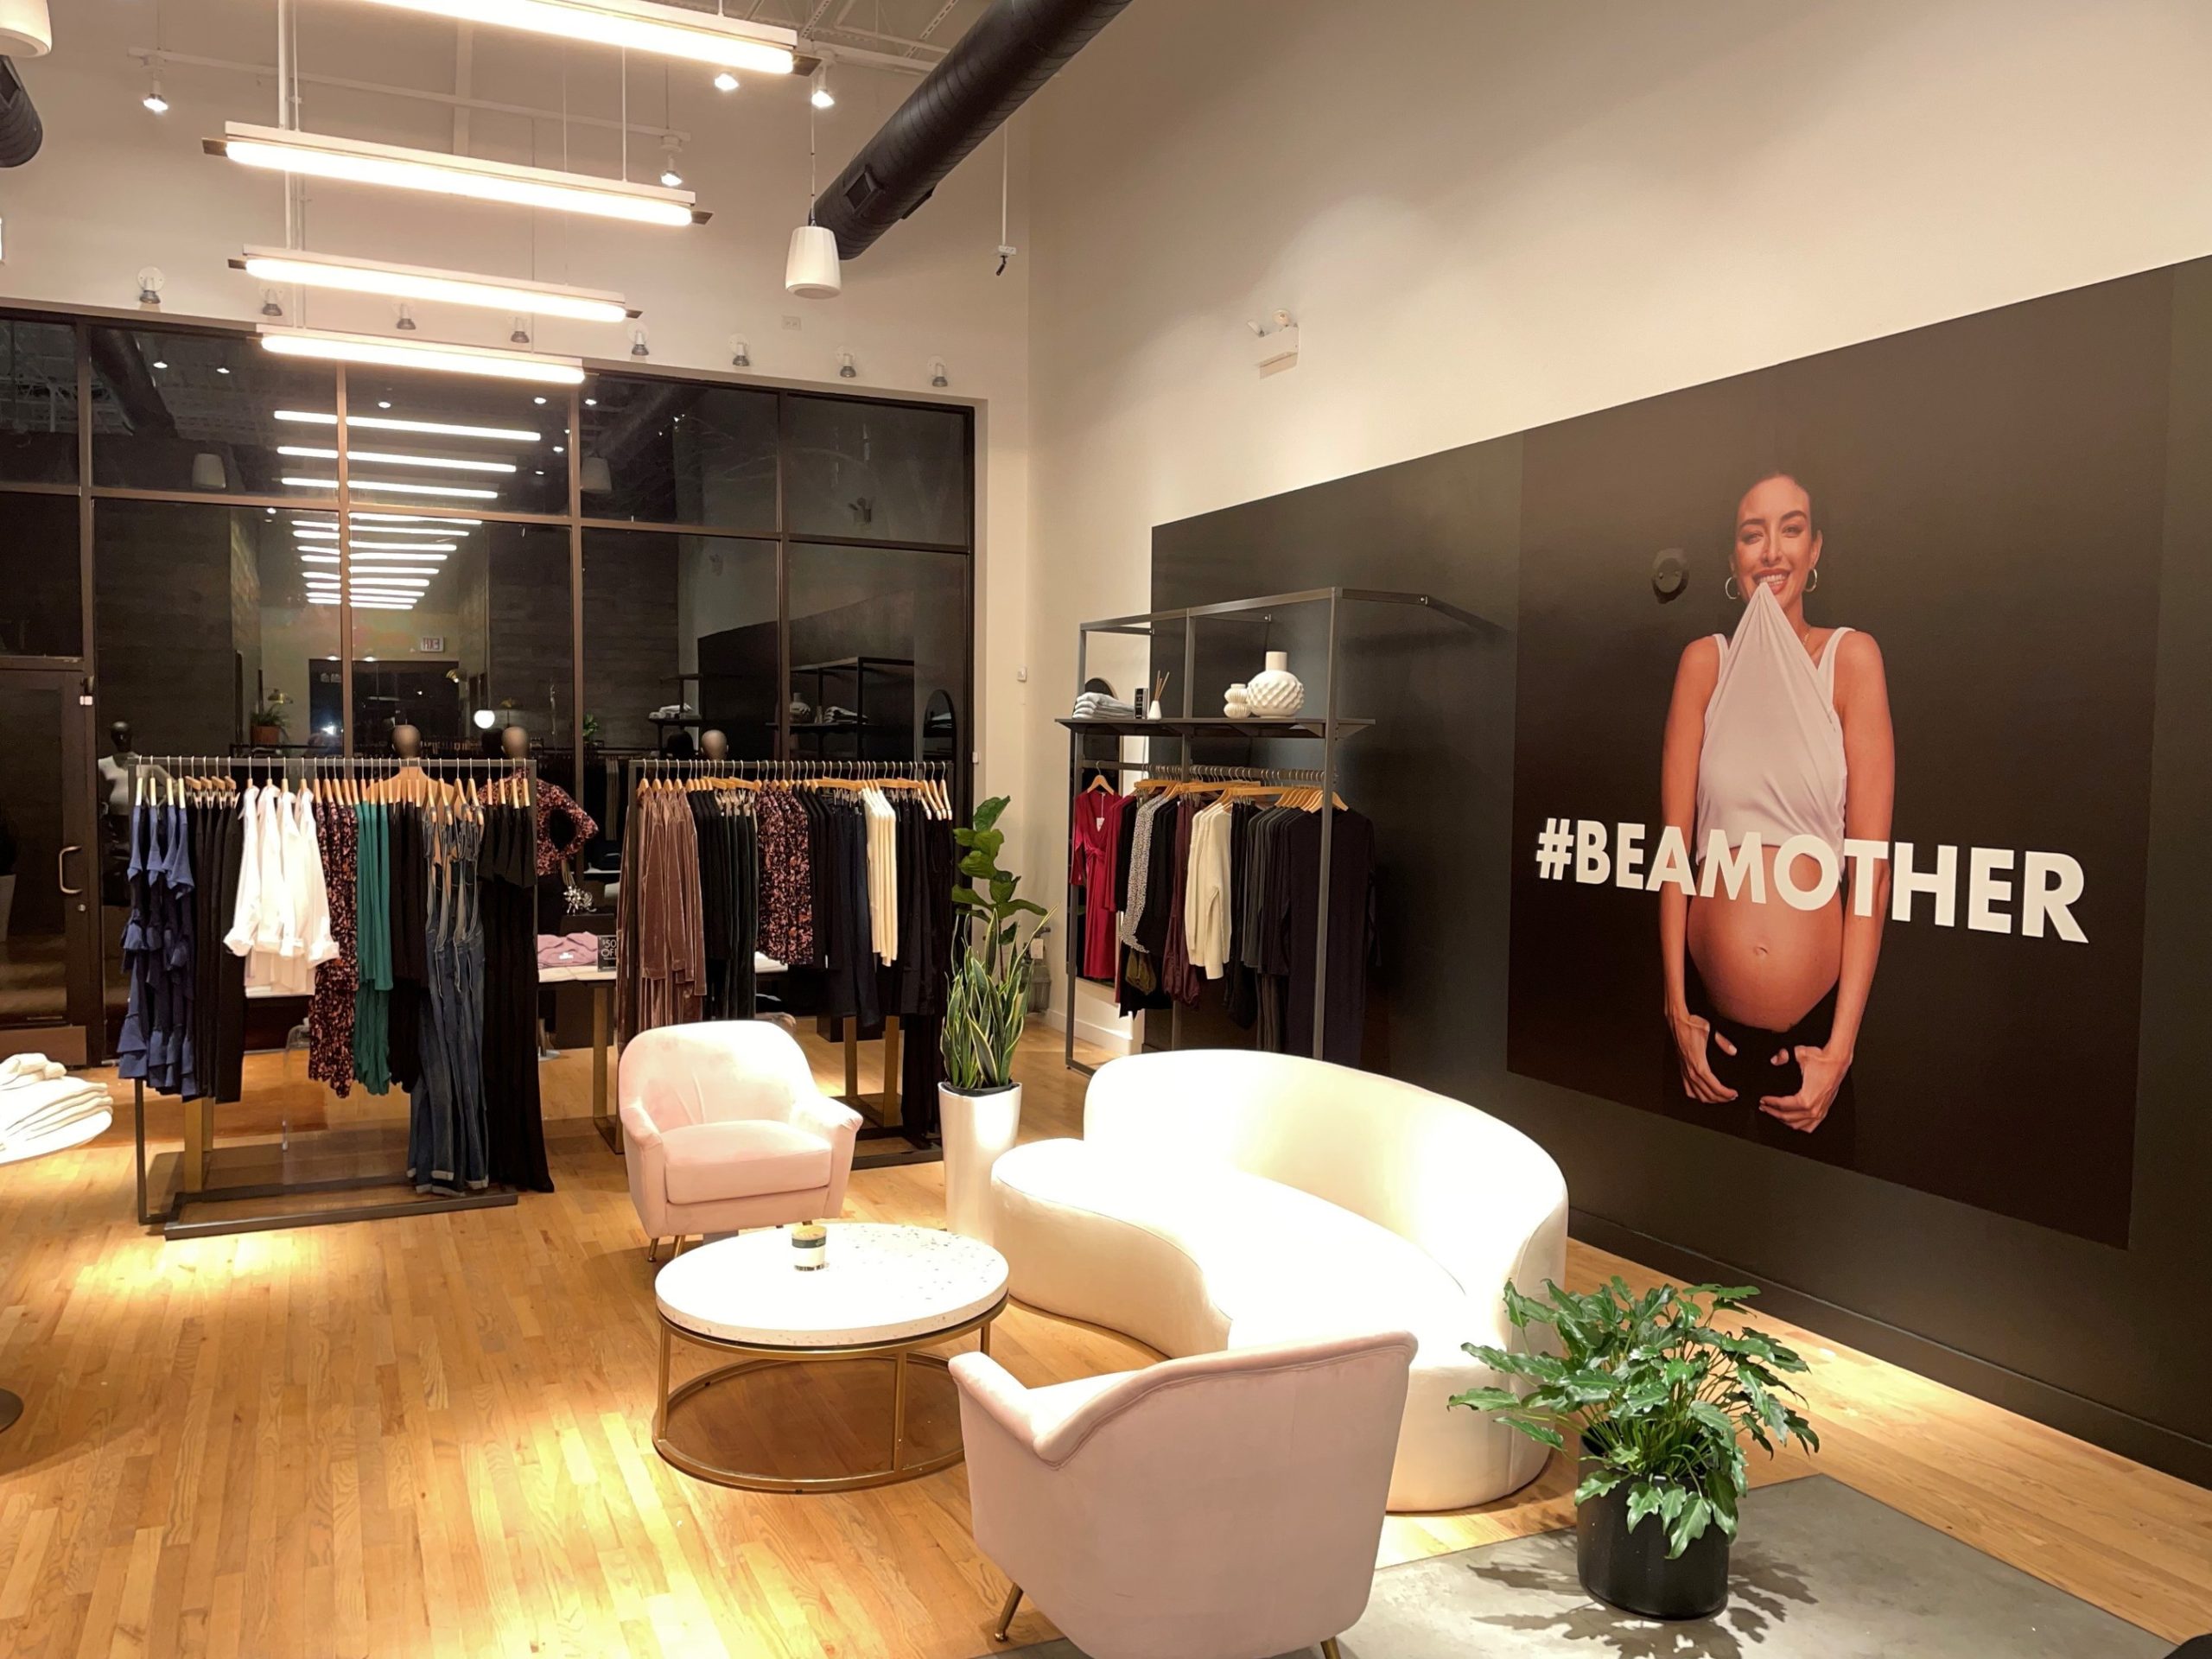 A Pea in the Pod Opens Stores in Chicago, New York